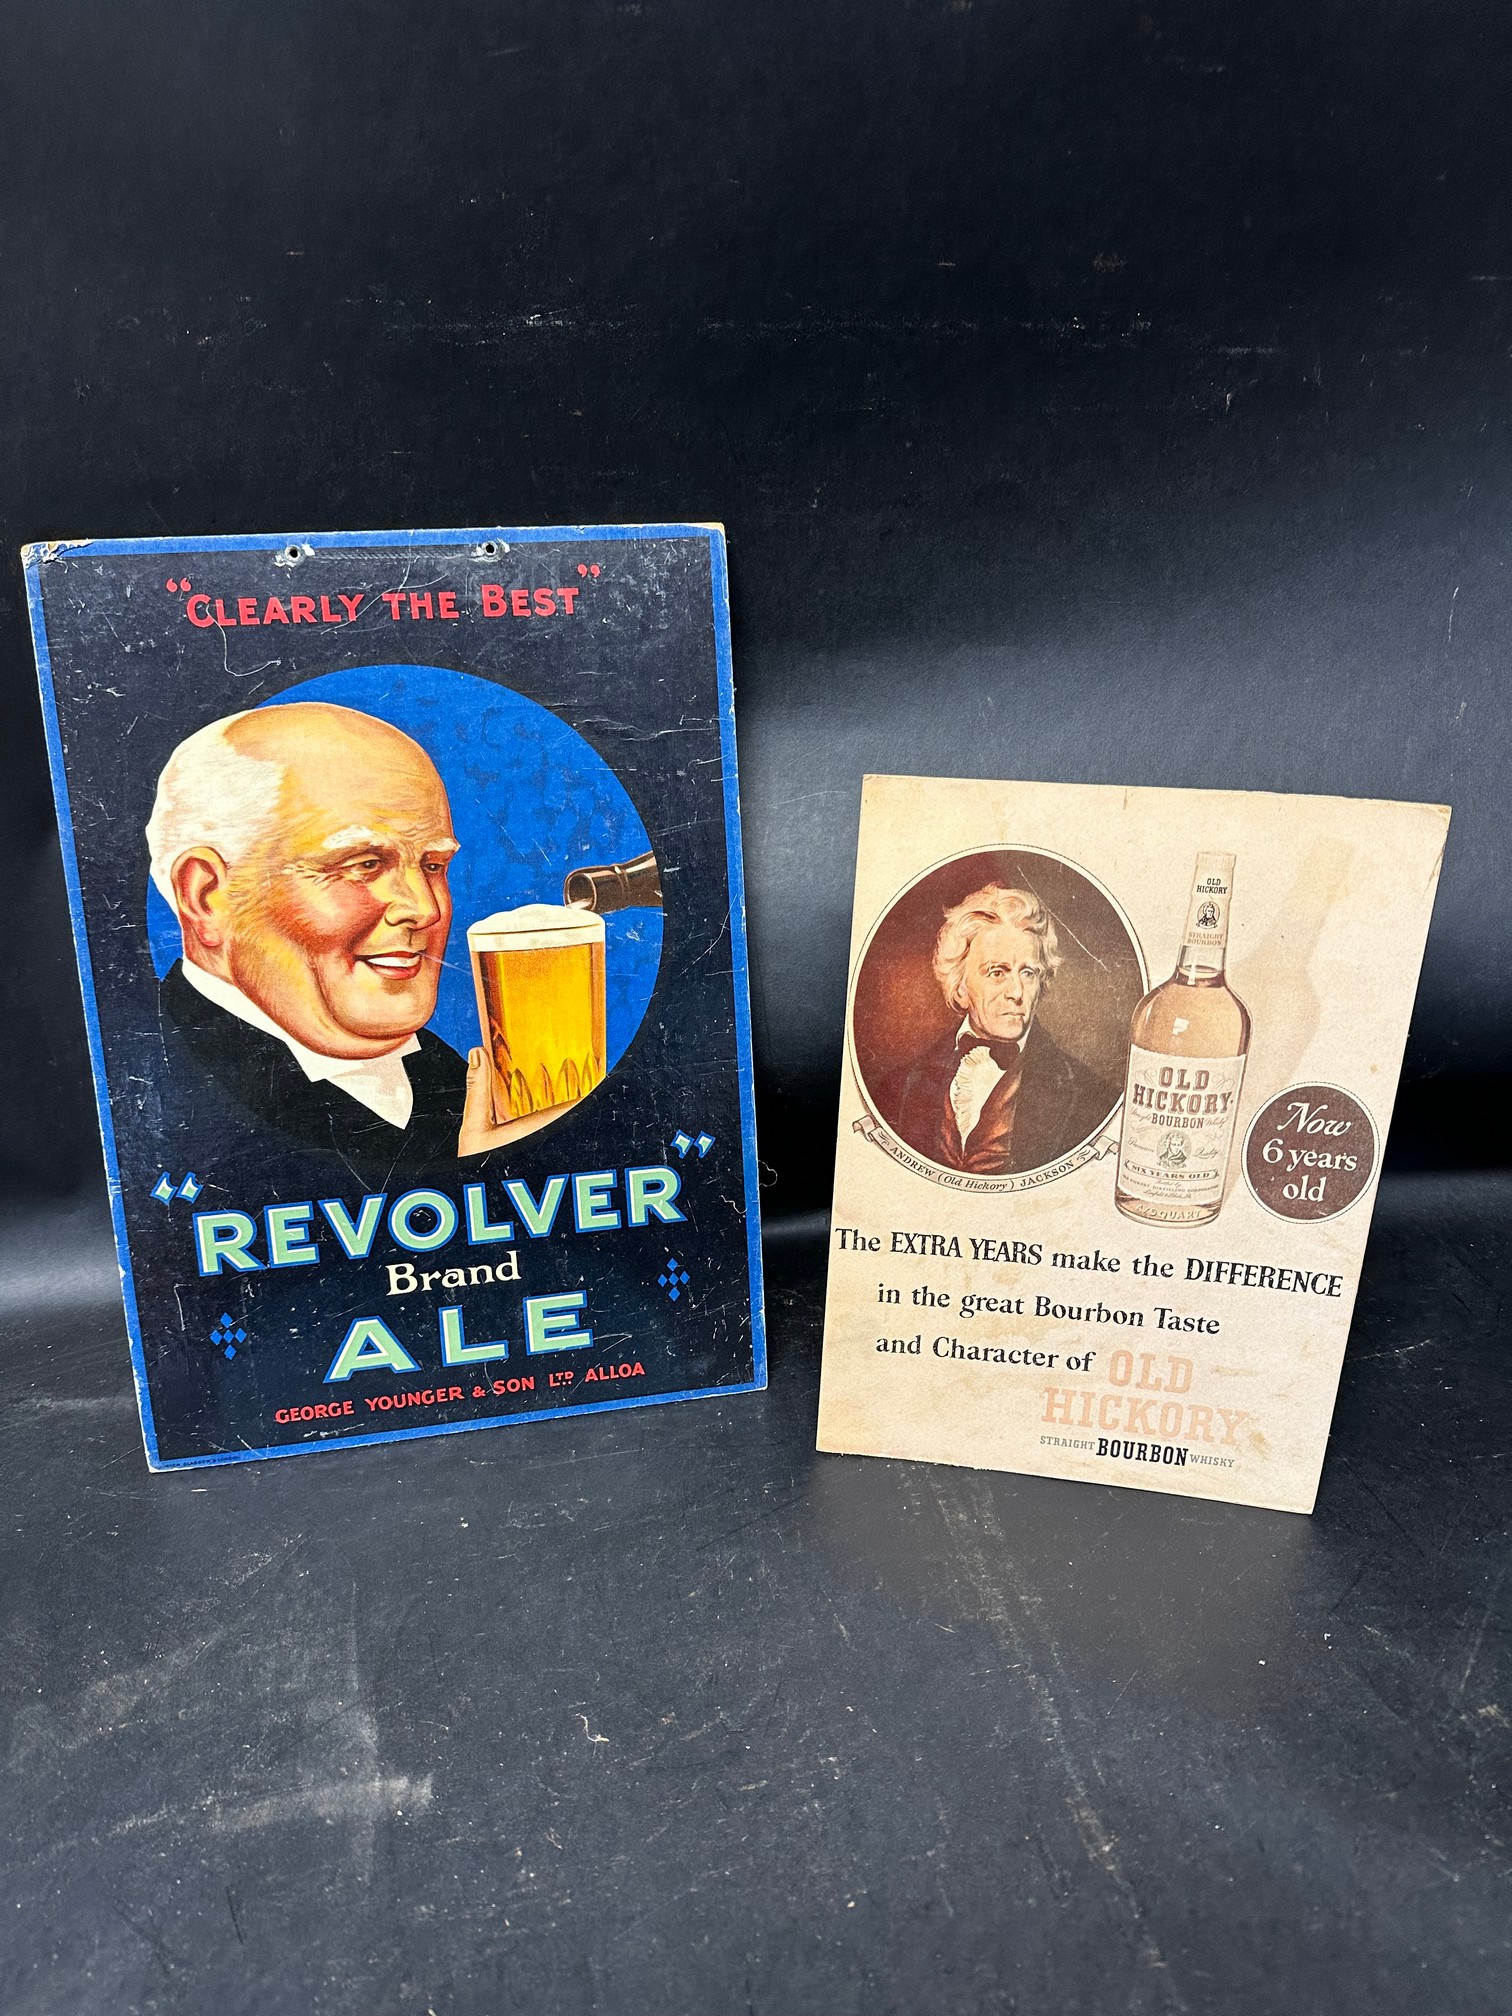 A hanging showcard for "Revolver" Ale by George Younger & Son Ltd, printed by Caliston, Glasgow &